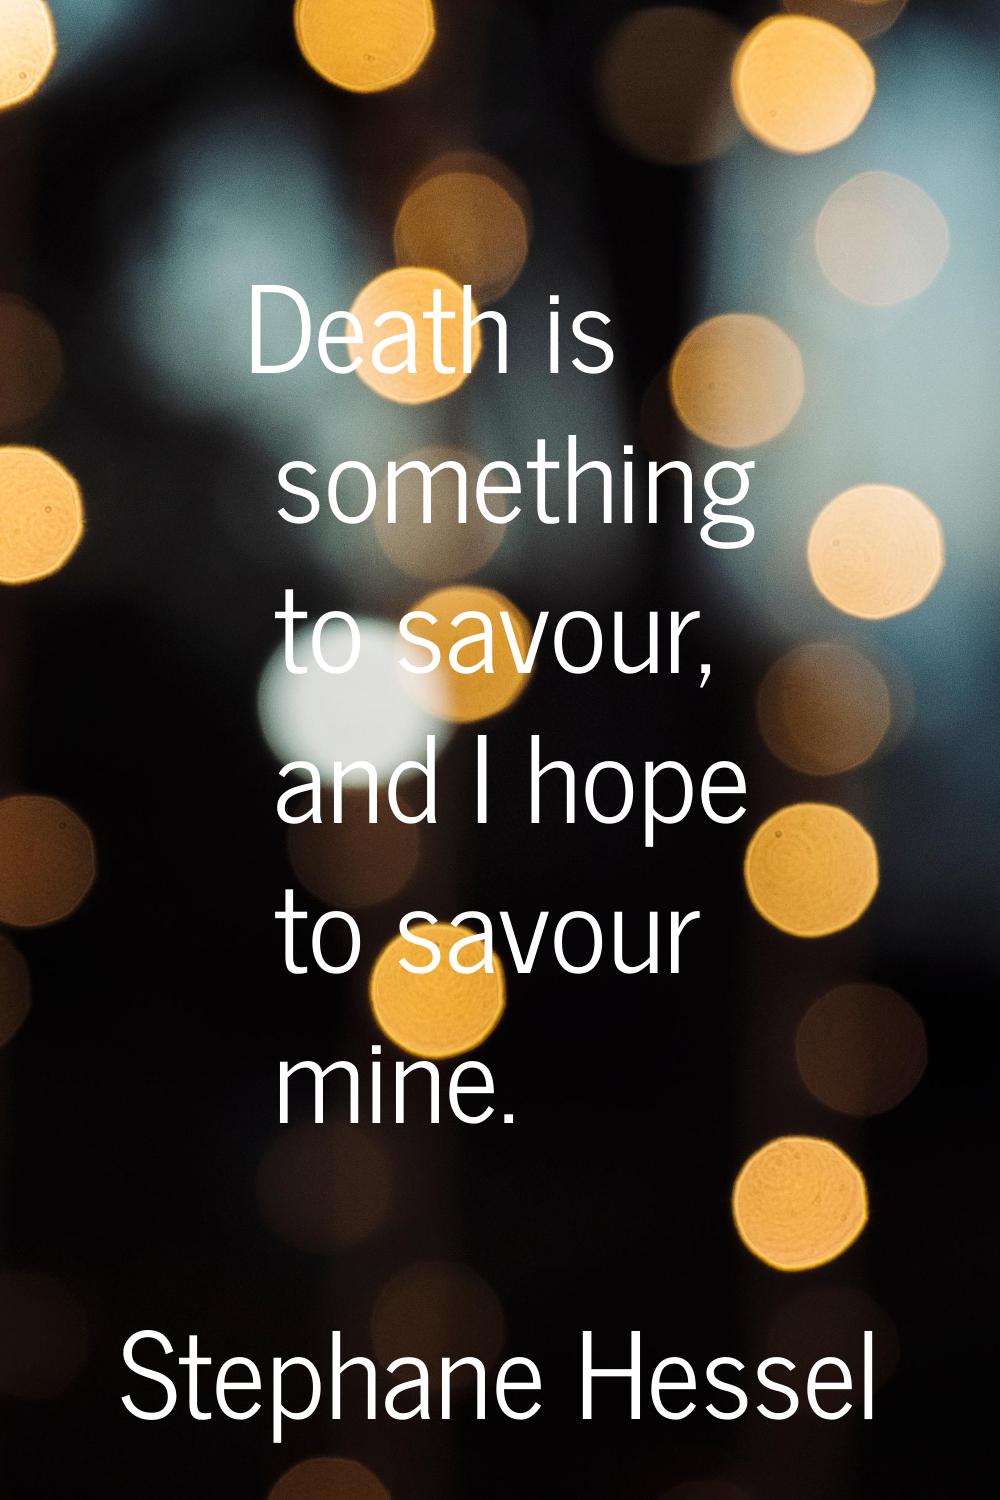 Death is something to savour, and I hope to savour mine.